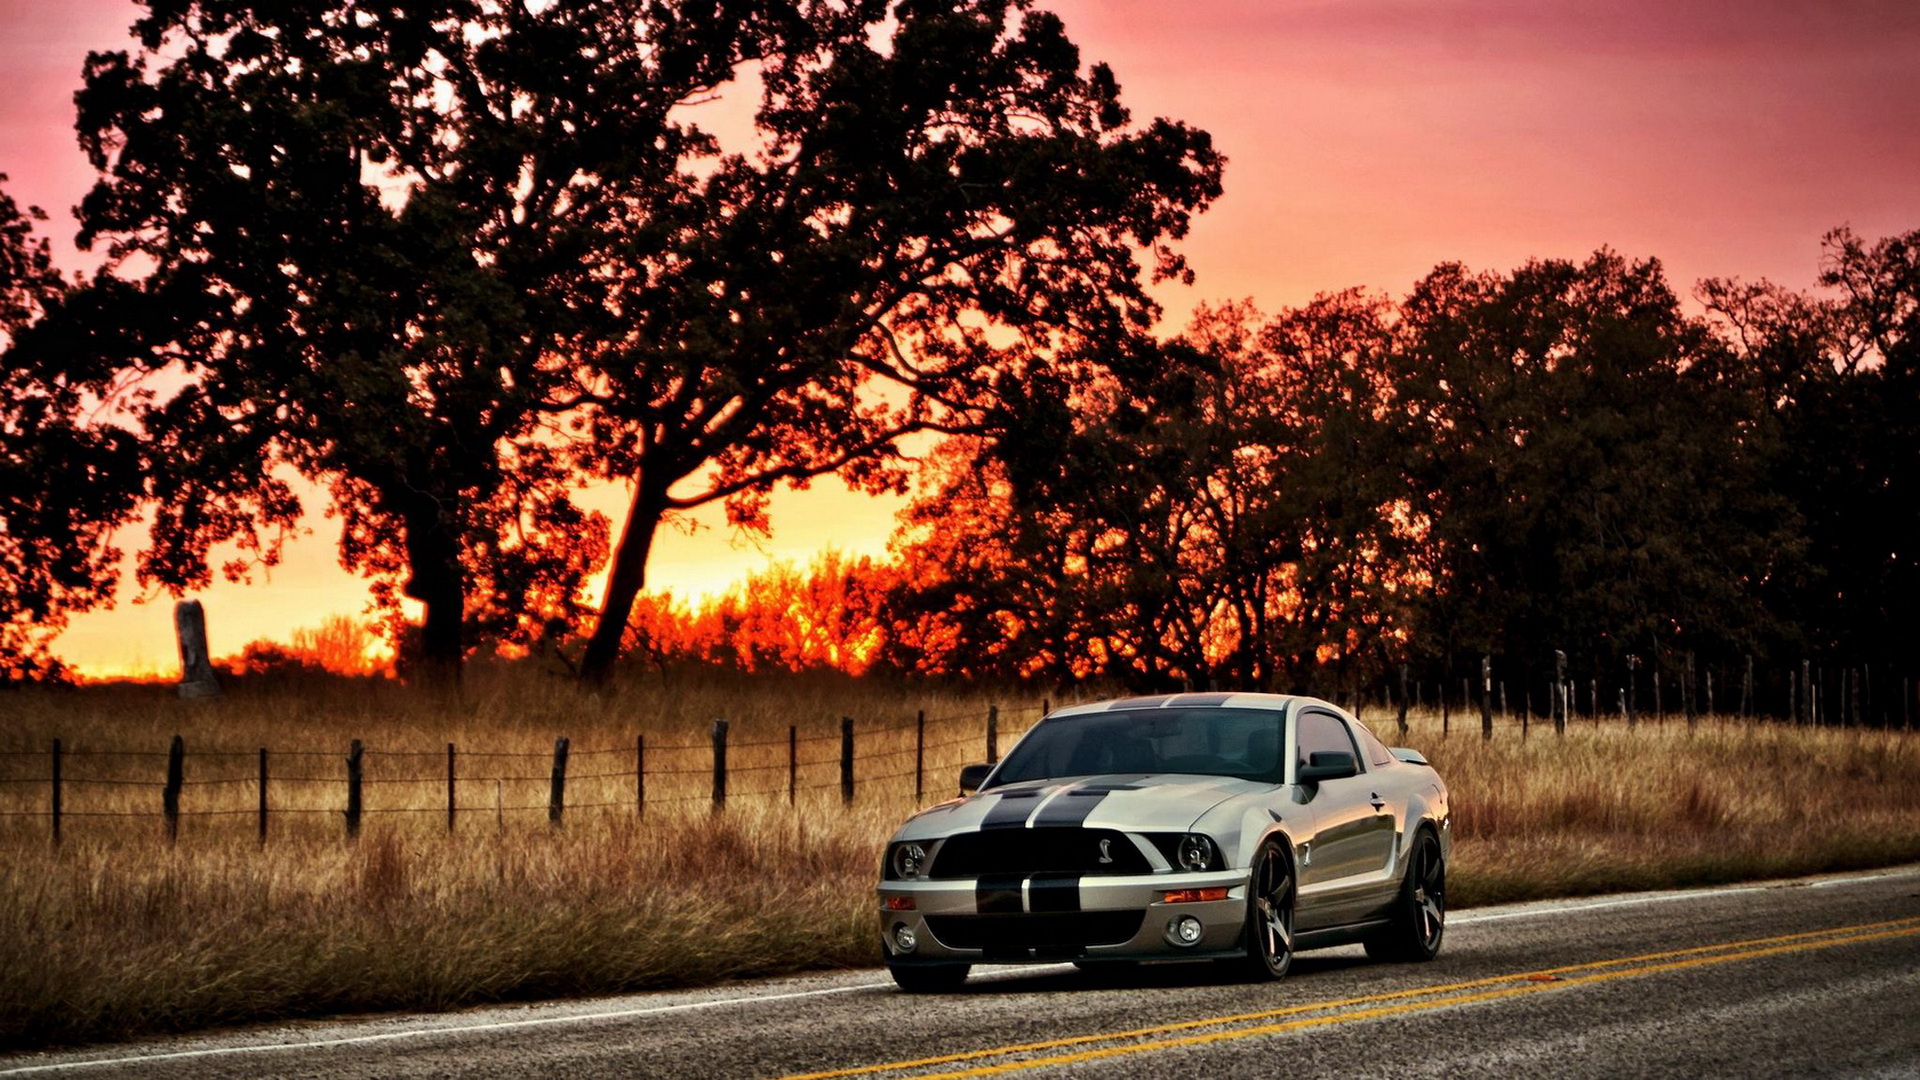 Ford Mustang gt500 Shelby на закате